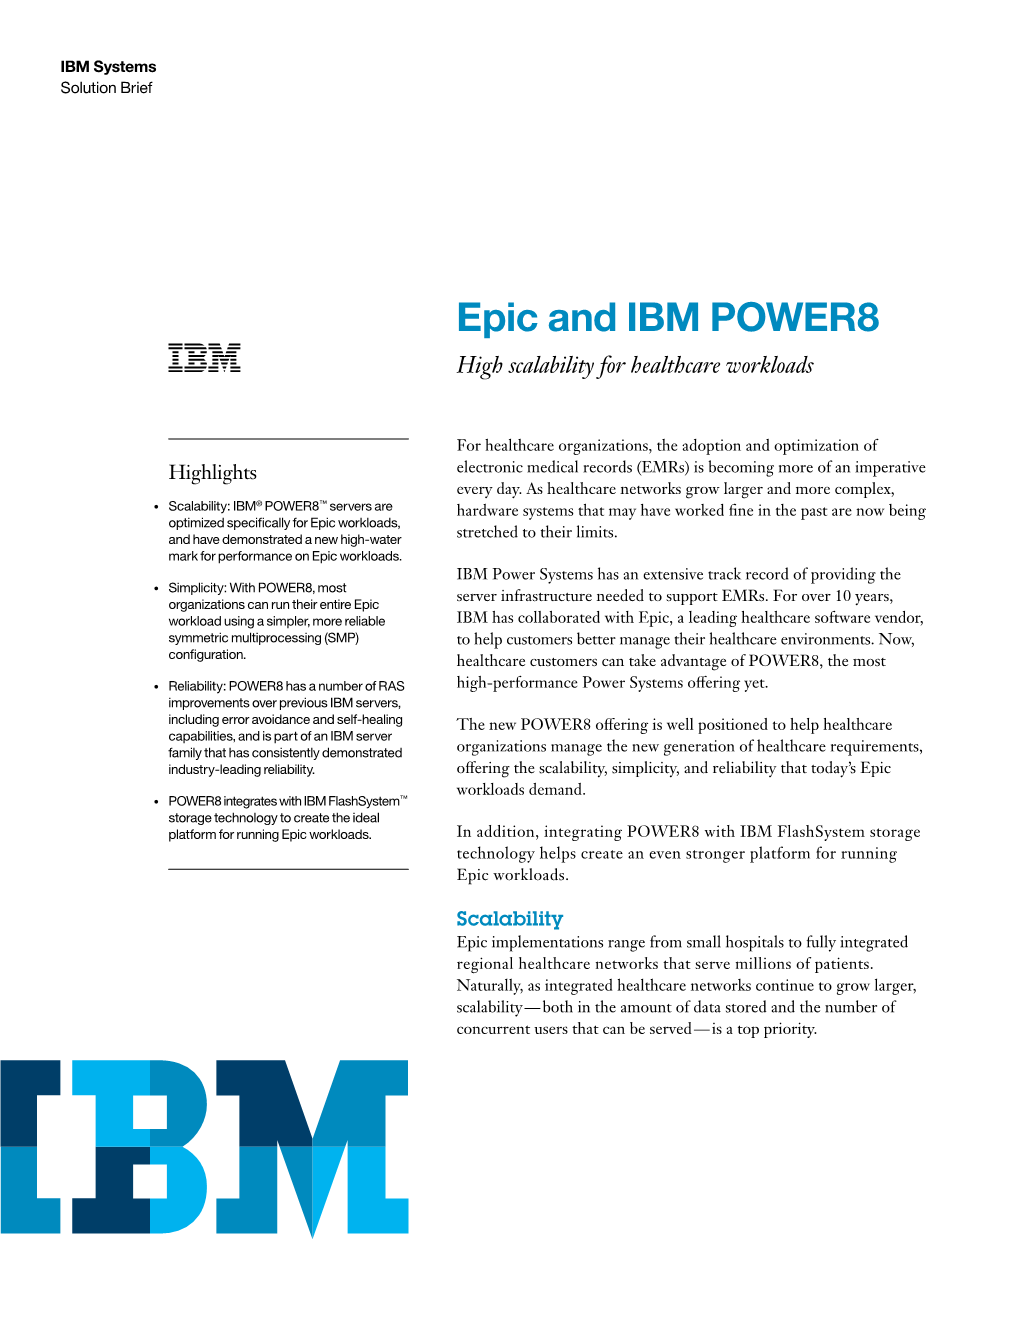 Epic and IBM POWER8 High Scalability for Healthcare Workloads